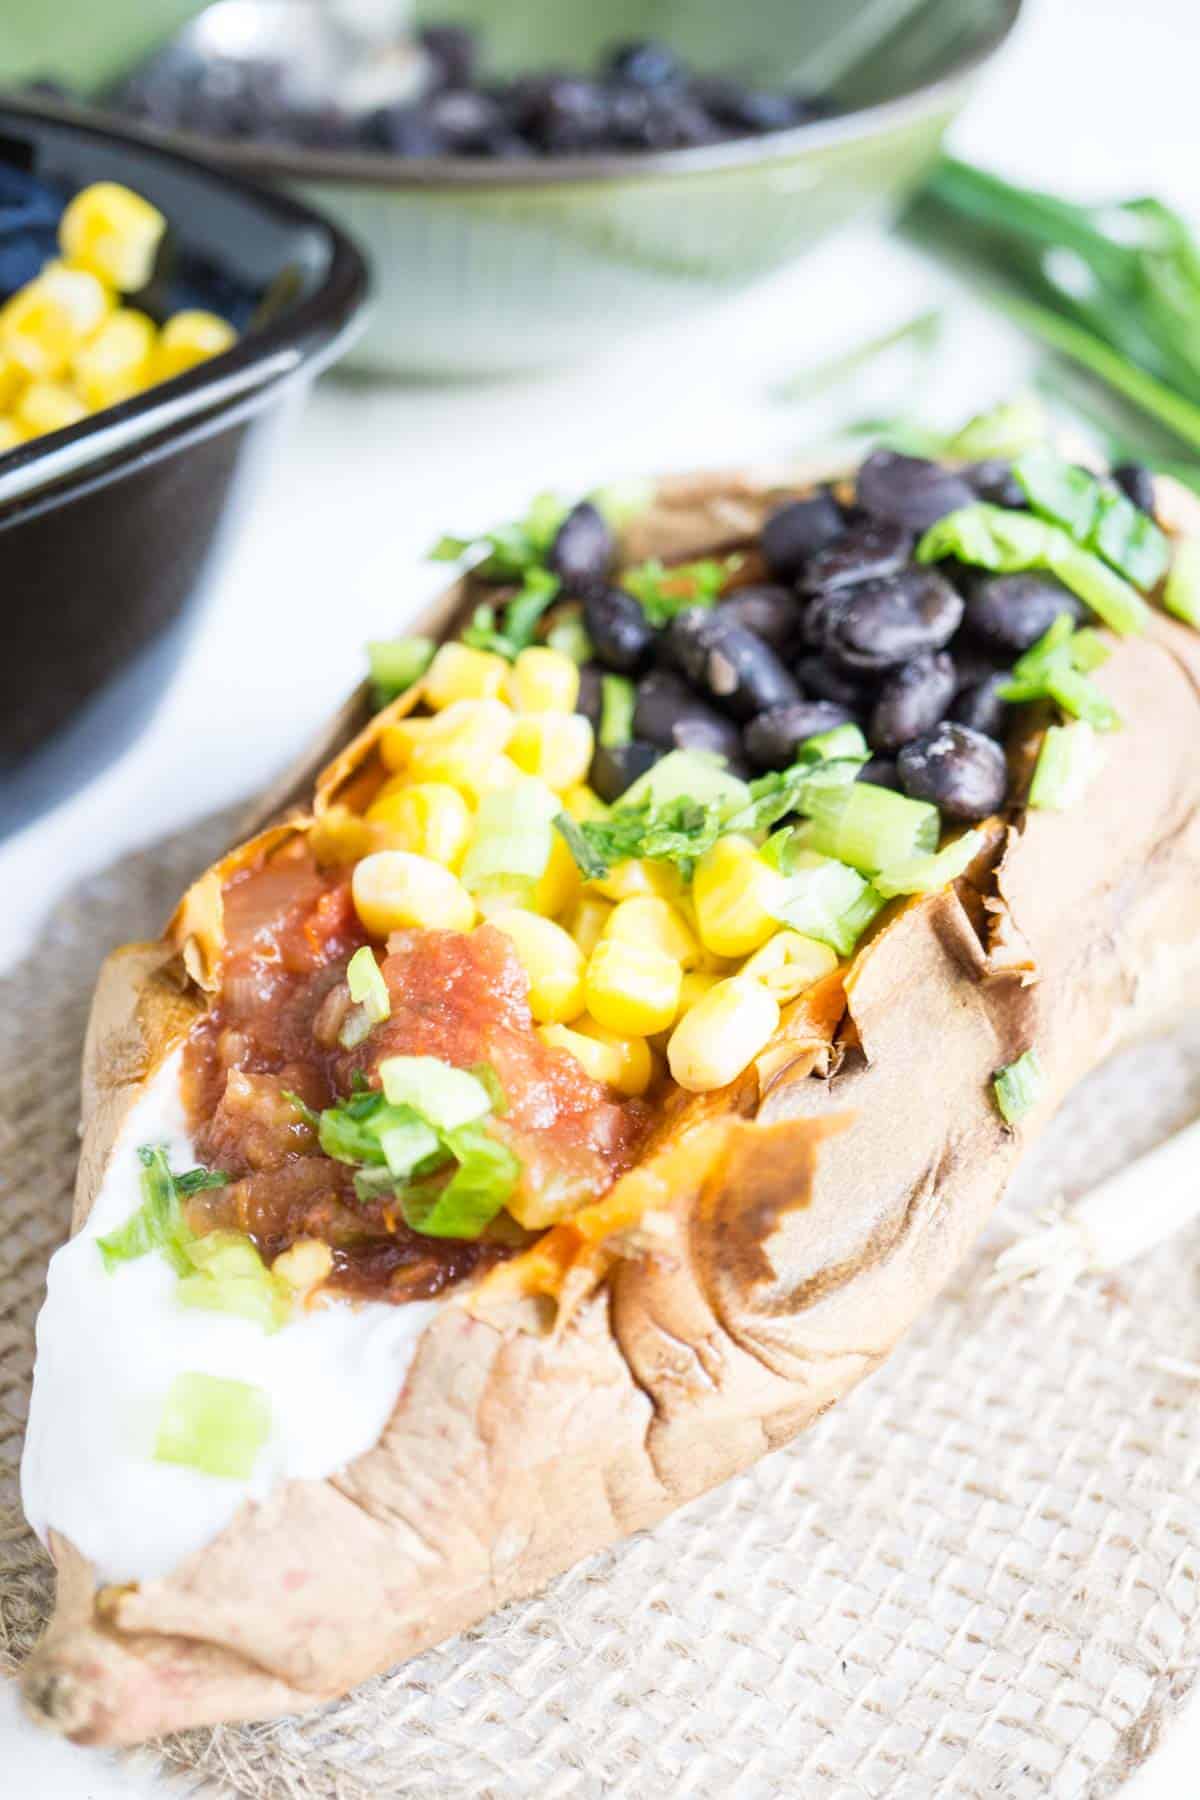 5 minute meal: Mexican Stuffed Baked Potatoes